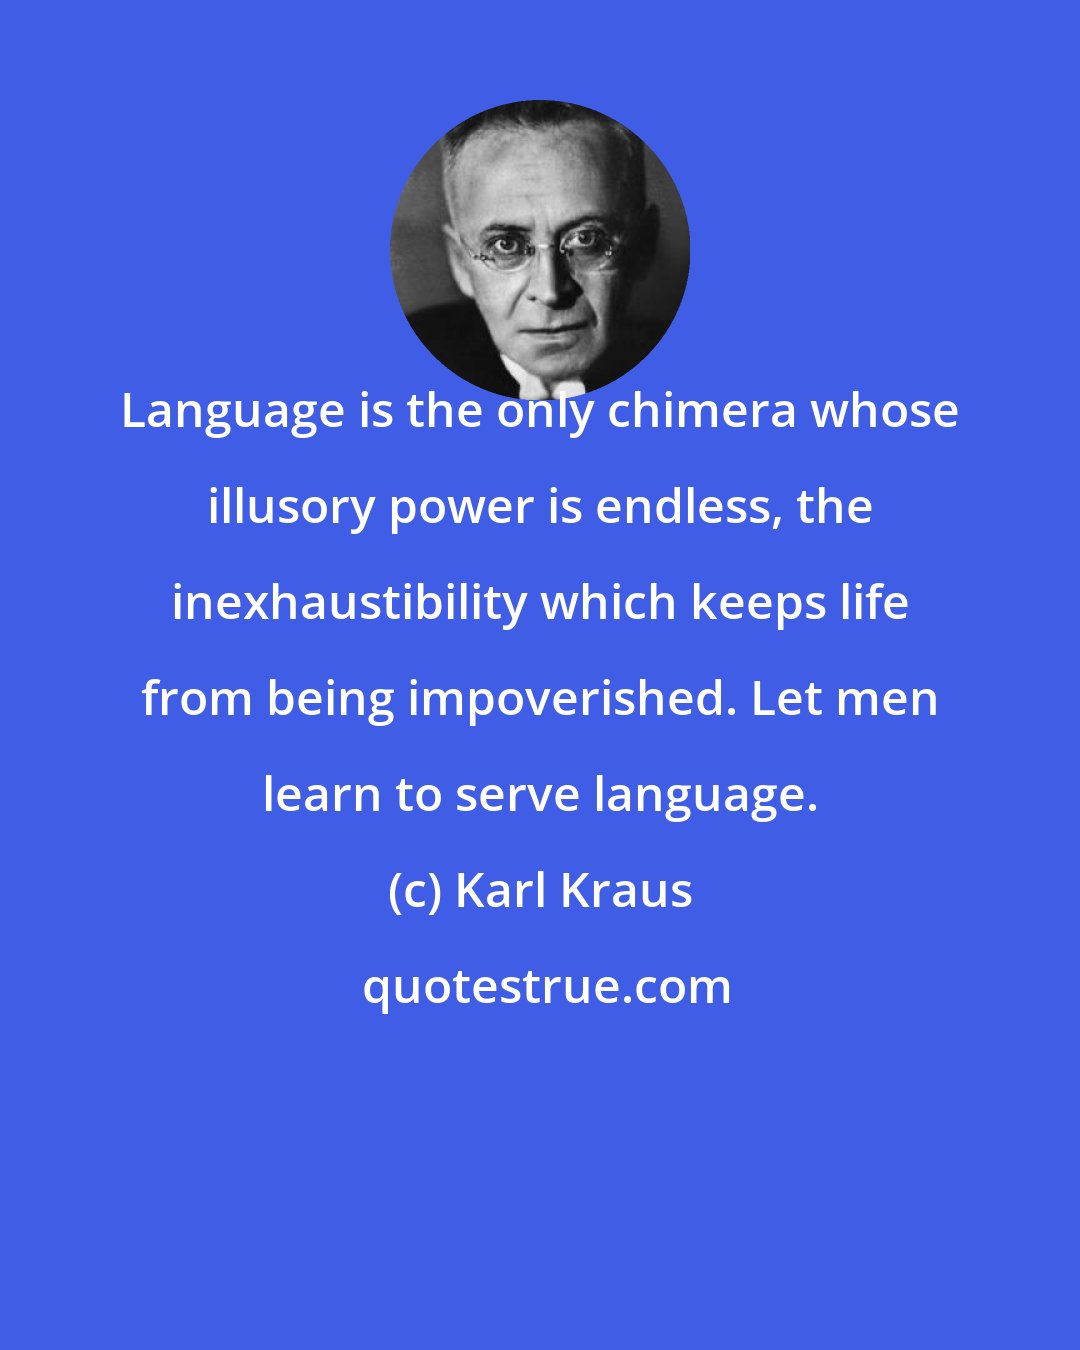 Karl Kraus: Language is the only chimera whose illusory power is endless, the inexhaustibility which keeps life from being impoverished. Let men learn to serve language.